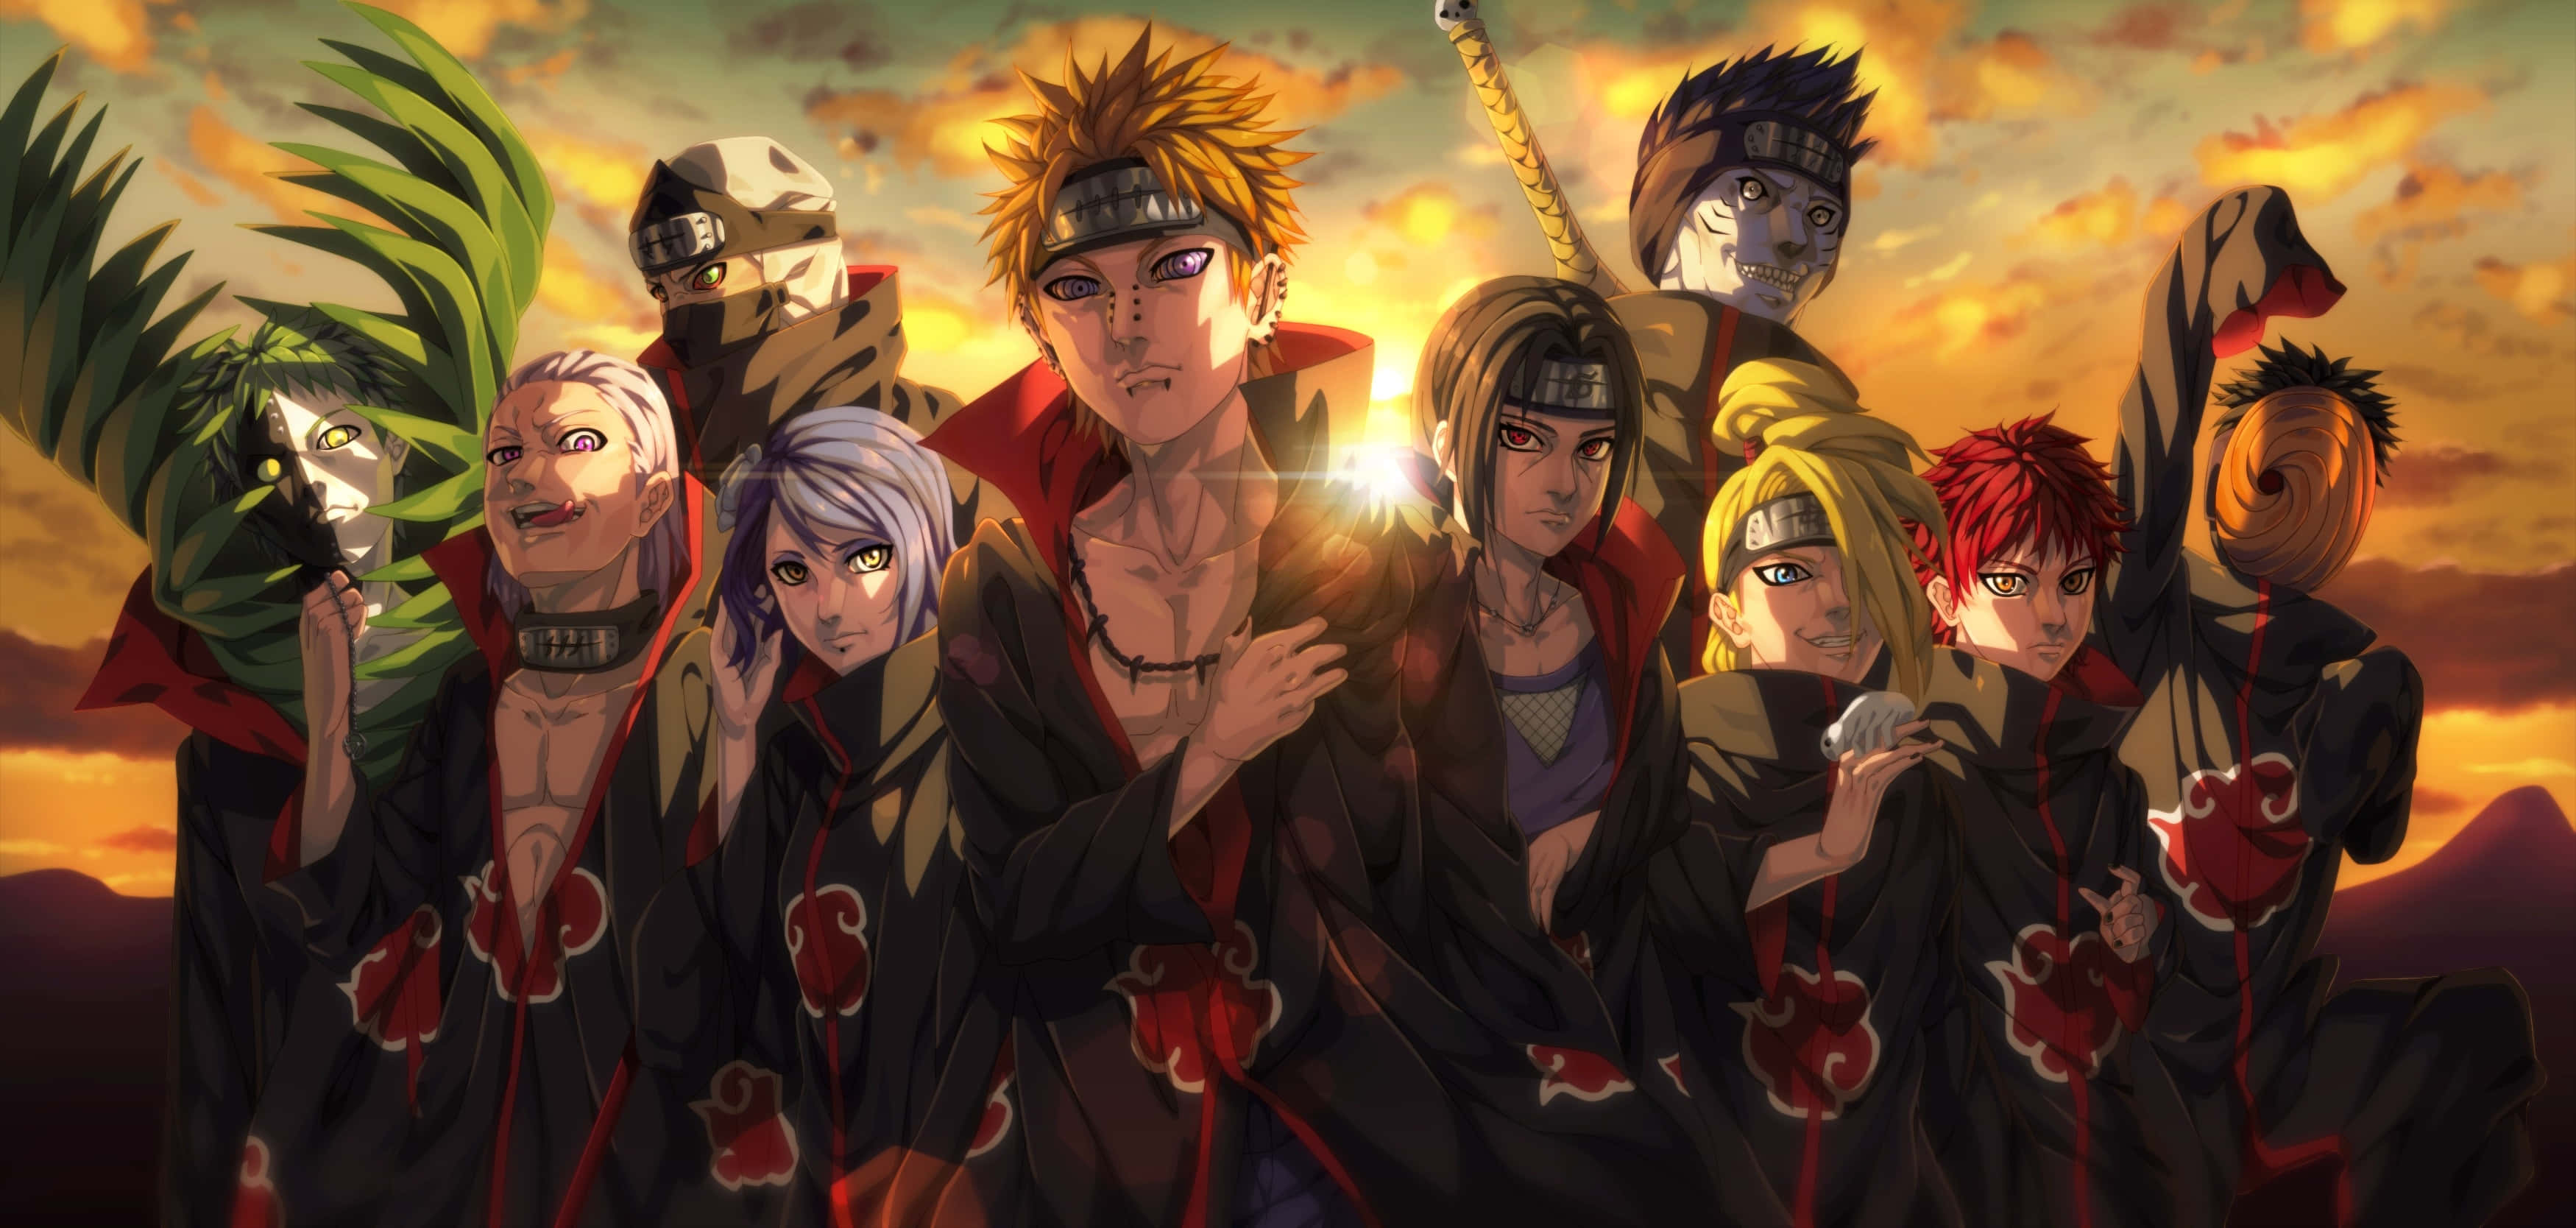 “Yahiko from Akatsuki on a Journey for Power” Wallpaper